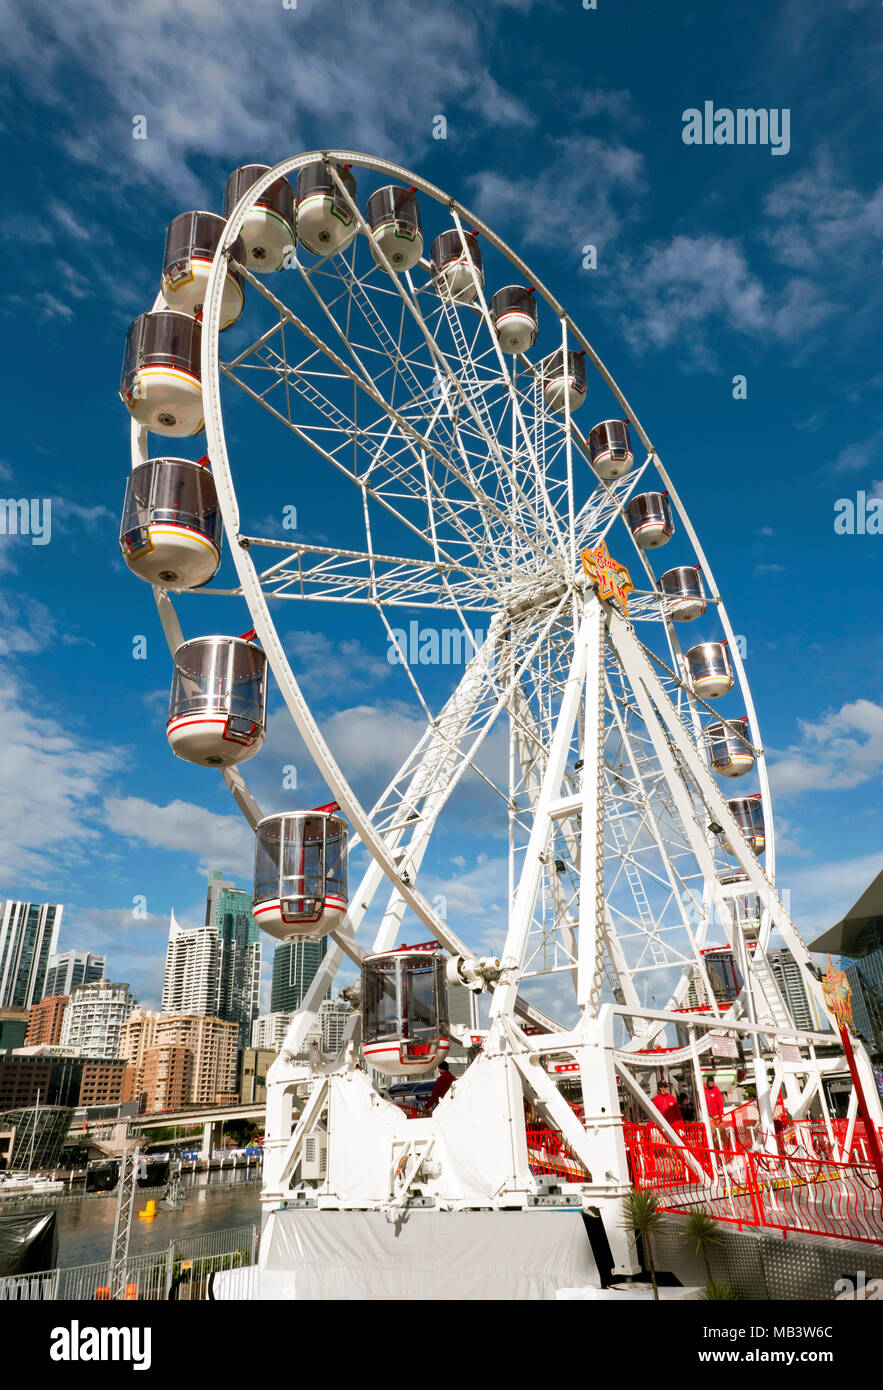 Star of the Show Ferris Wheel, Darling Harbour, Sydney, New South Wales, Australia Stock Photo